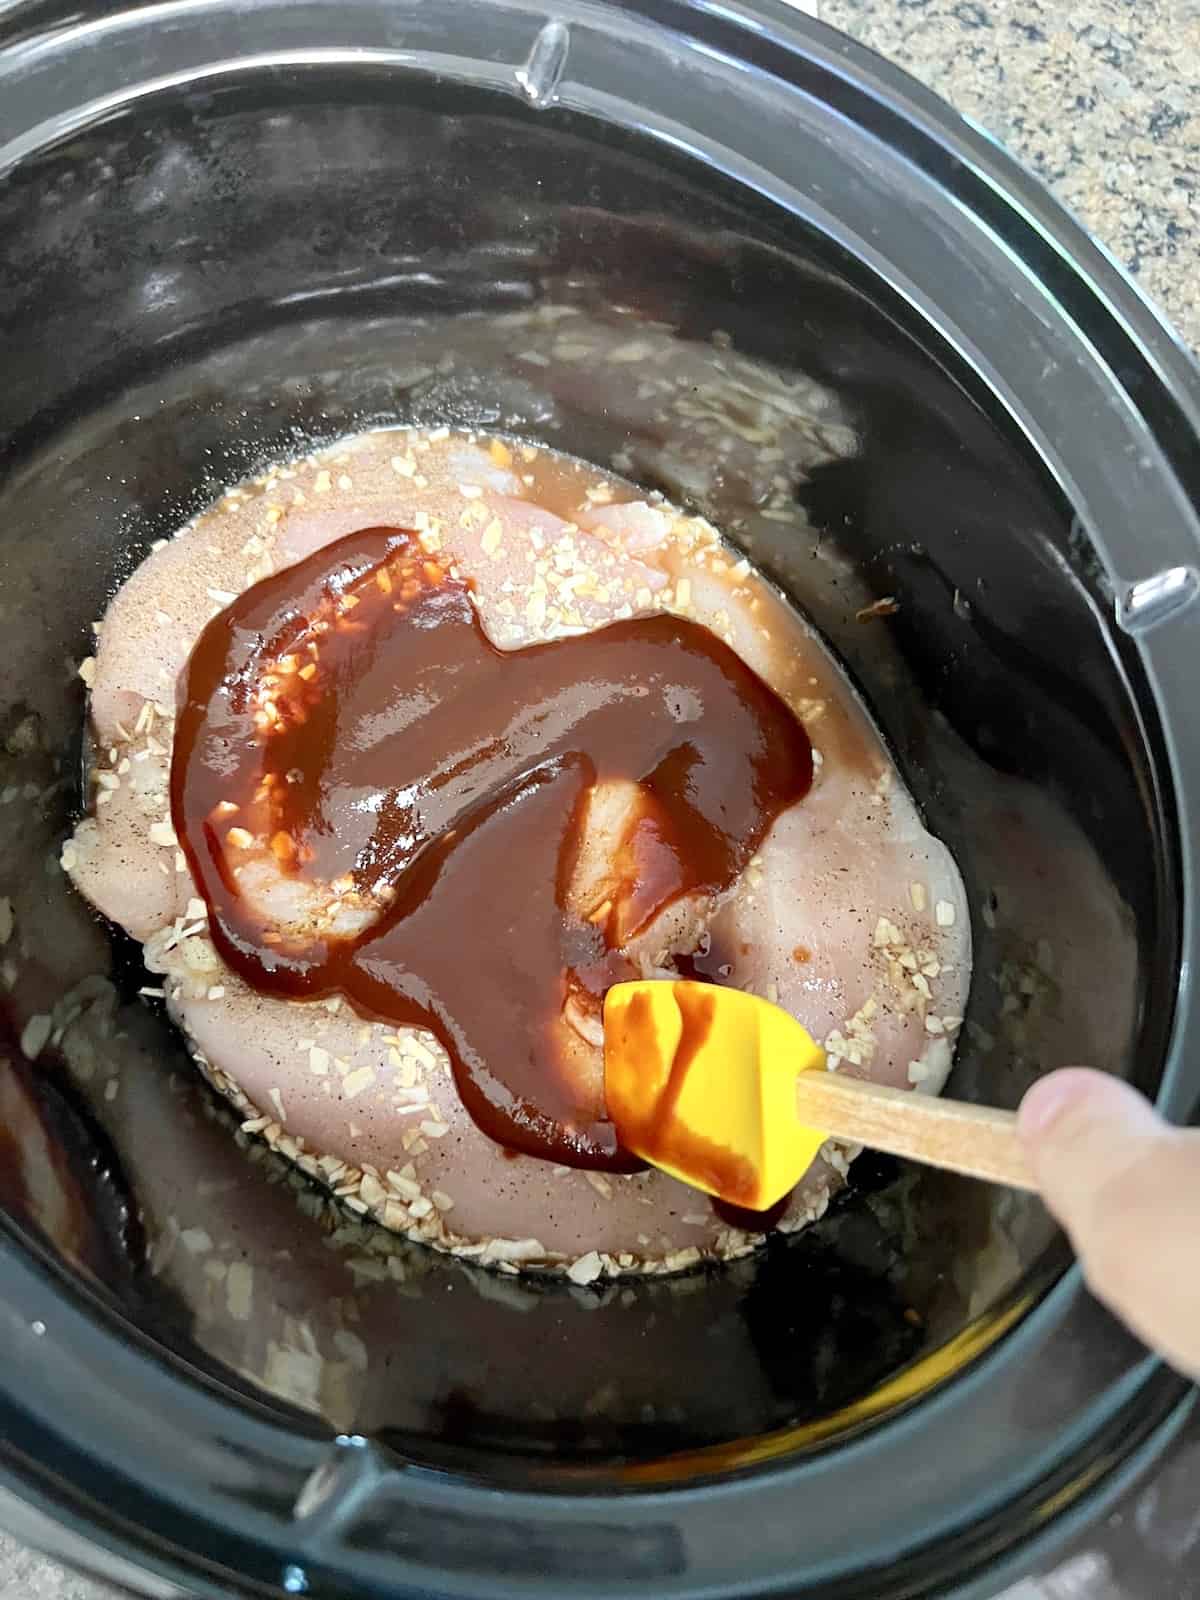 Adding ingredients and spreading bbq sauce over raw chicken.